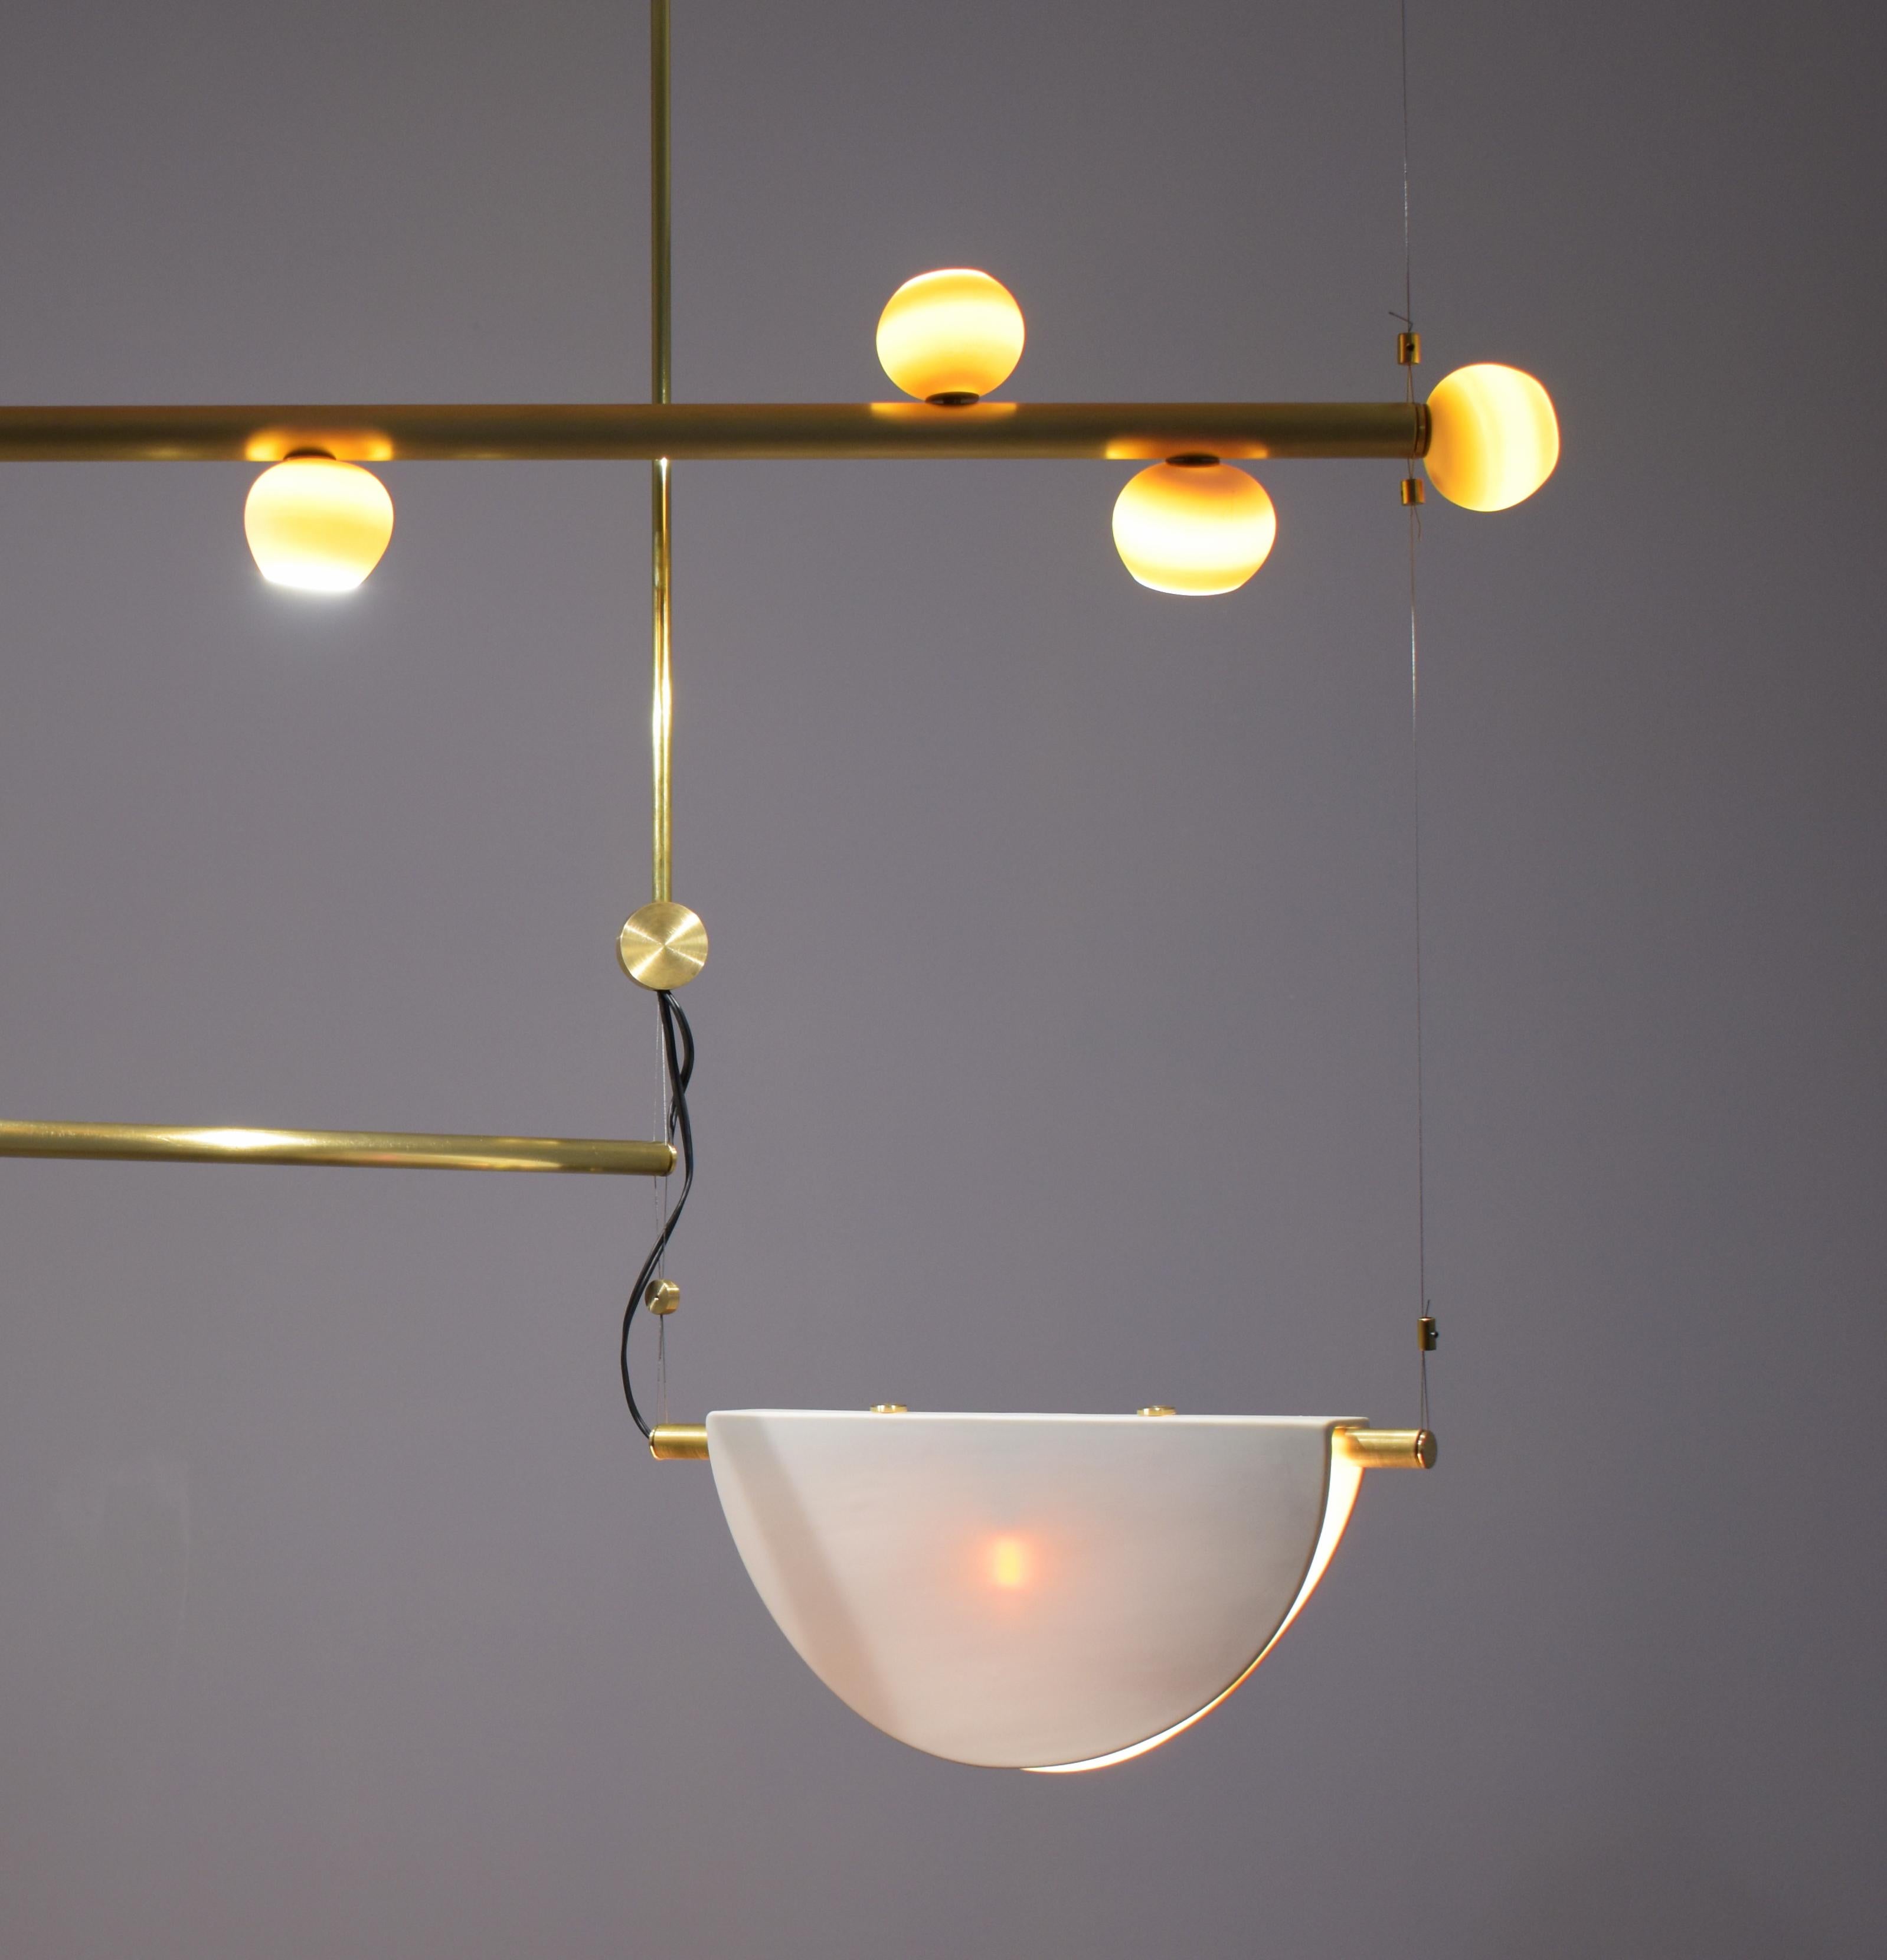 Contemporary Brass Sculpted Light Suspension, My Queen III, Signed Periclis Frementitis